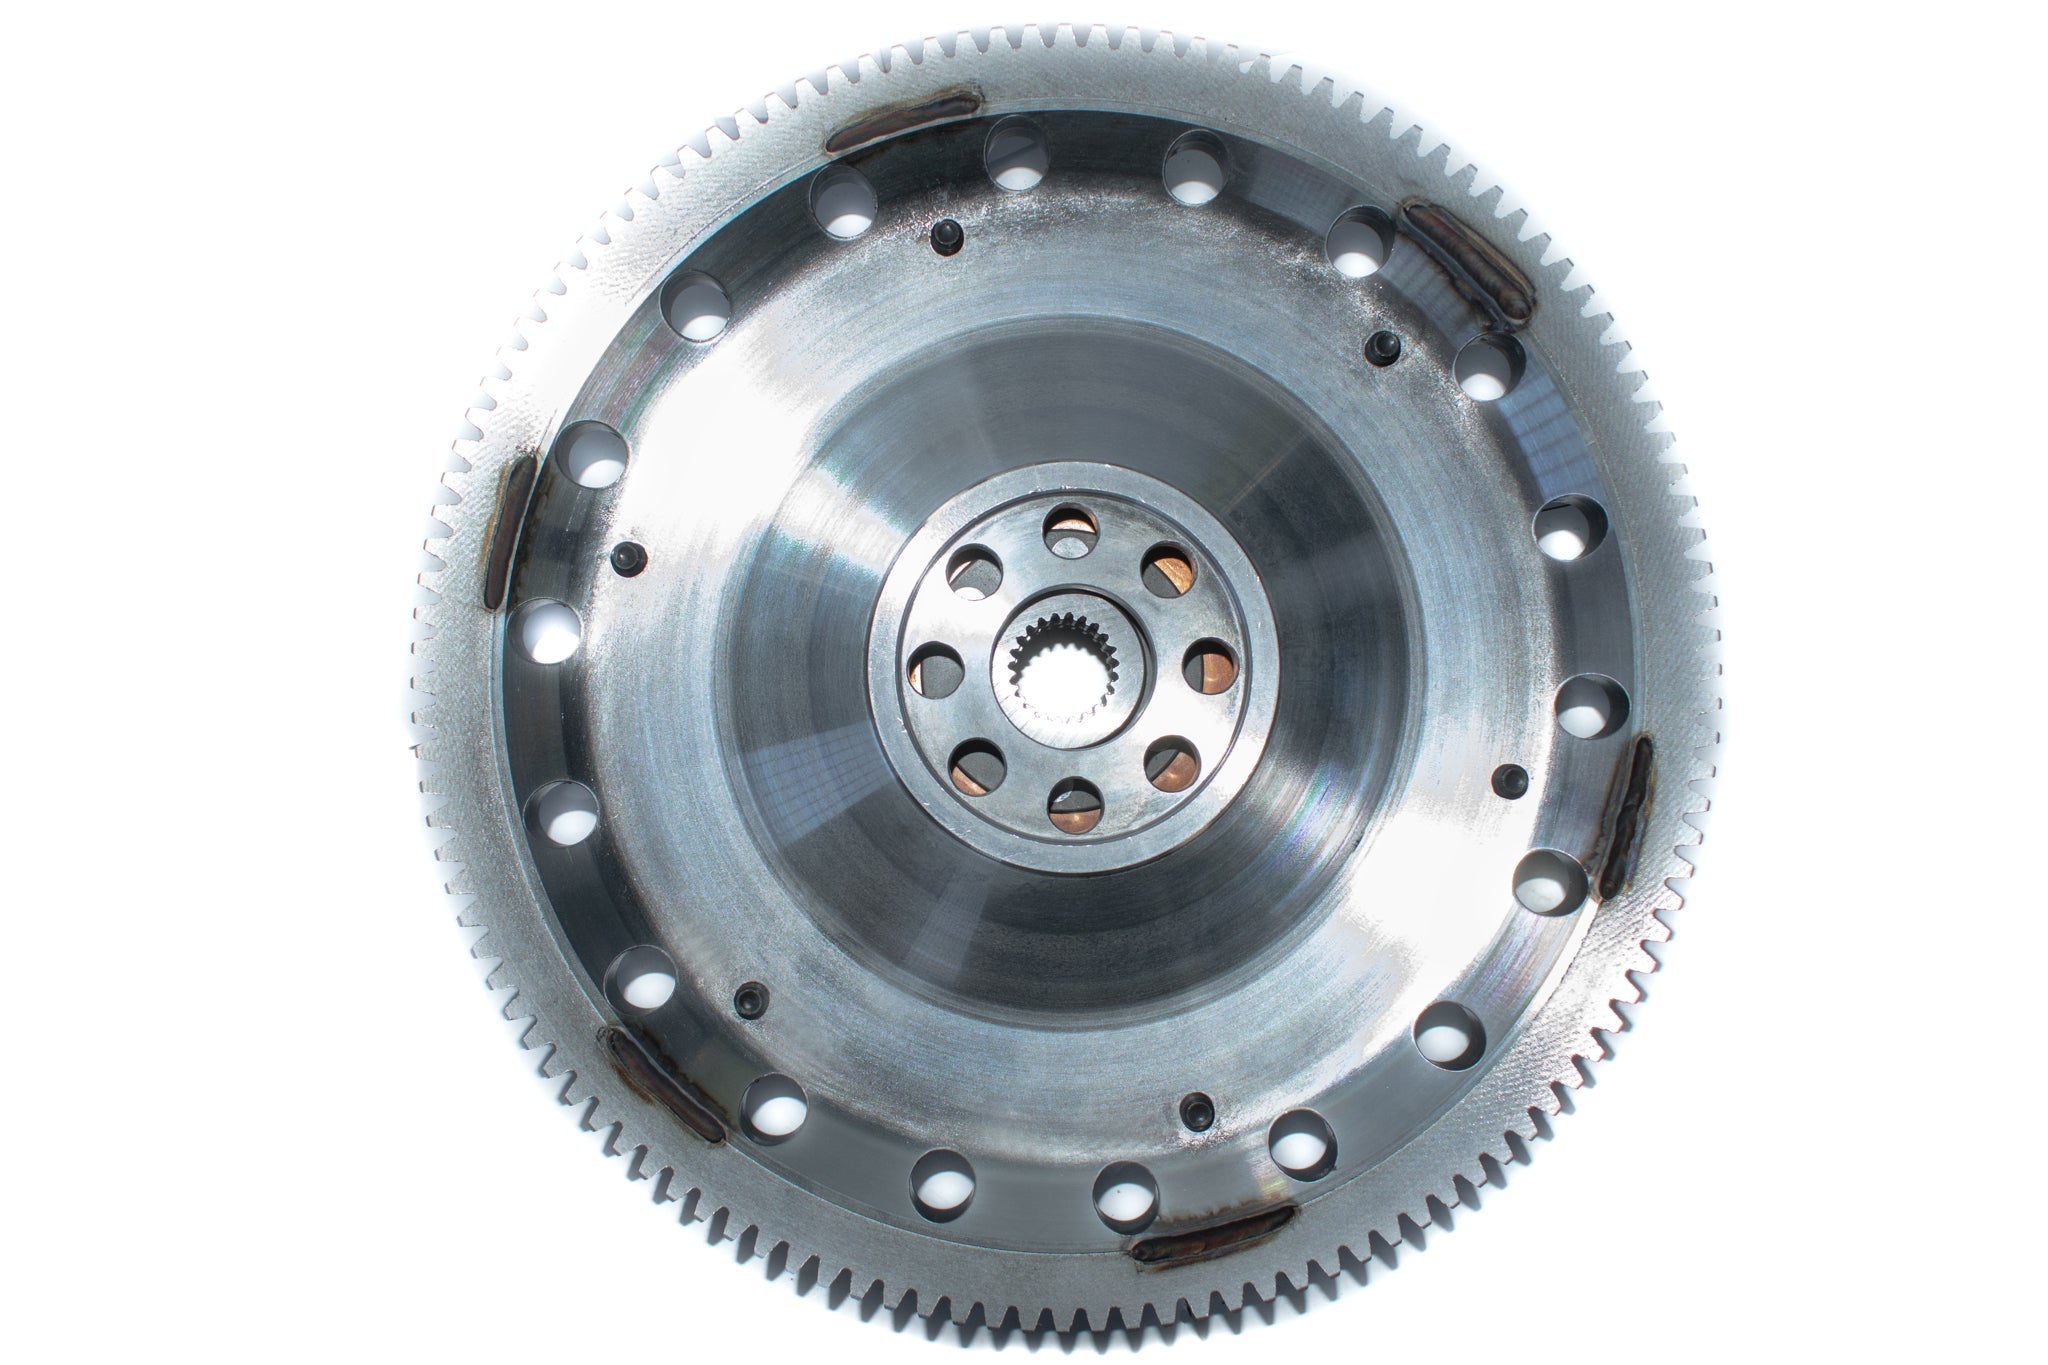 Twin Disk Clutch Kit for Honda K20 Engines - RTMG Performance